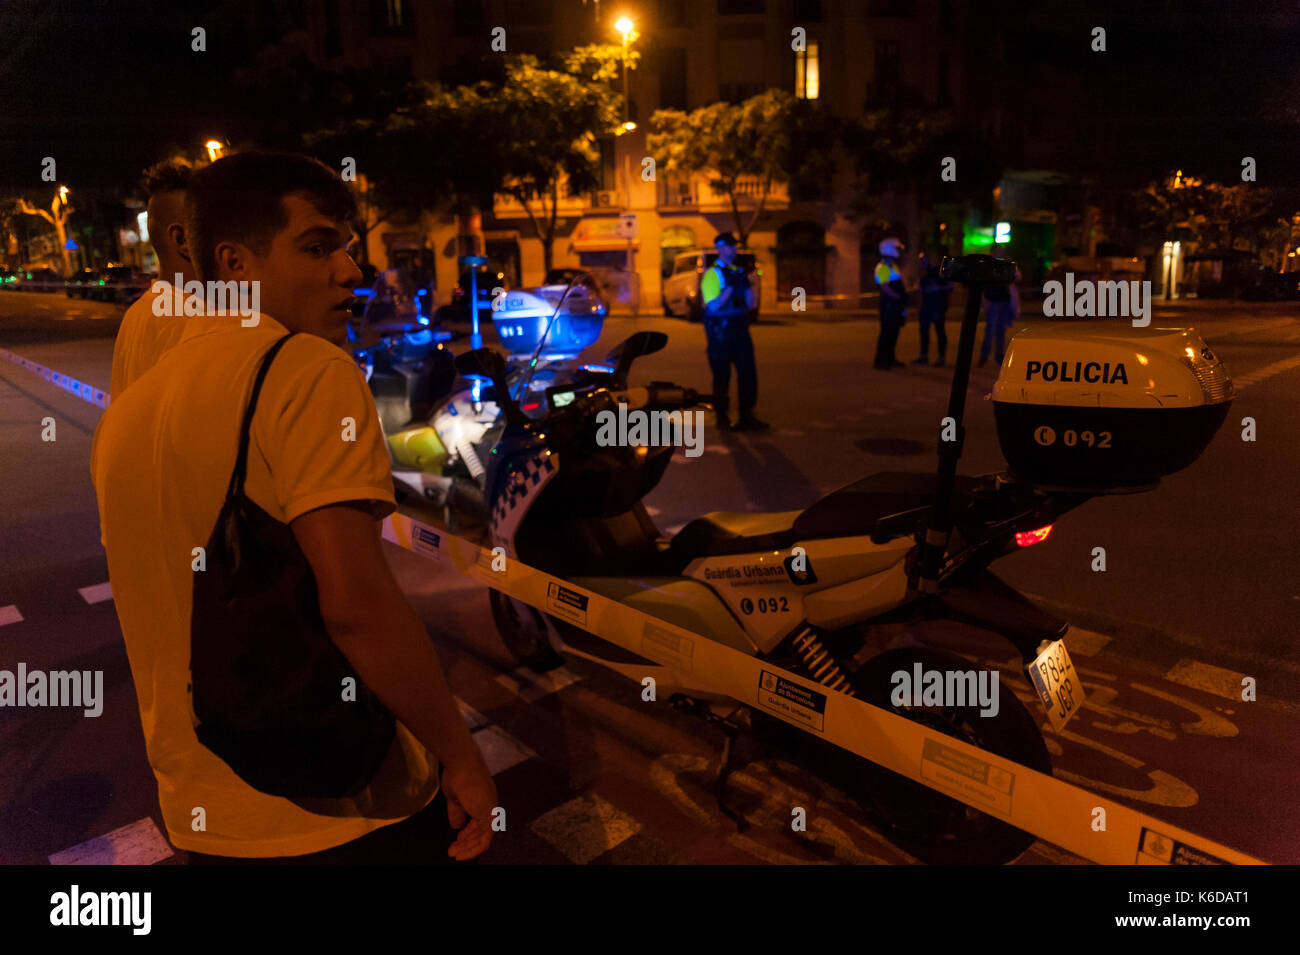 Barcelona, Catalonia. 12th Sep, 2017. Spain. September 12th, 2017. Several neighbors wait to be able to enter their homes as the police operation has cordoned off several blocks around the van suspected of housing an explosive device. Credit: Charlie Perez/Alamy Live News Stock Photo